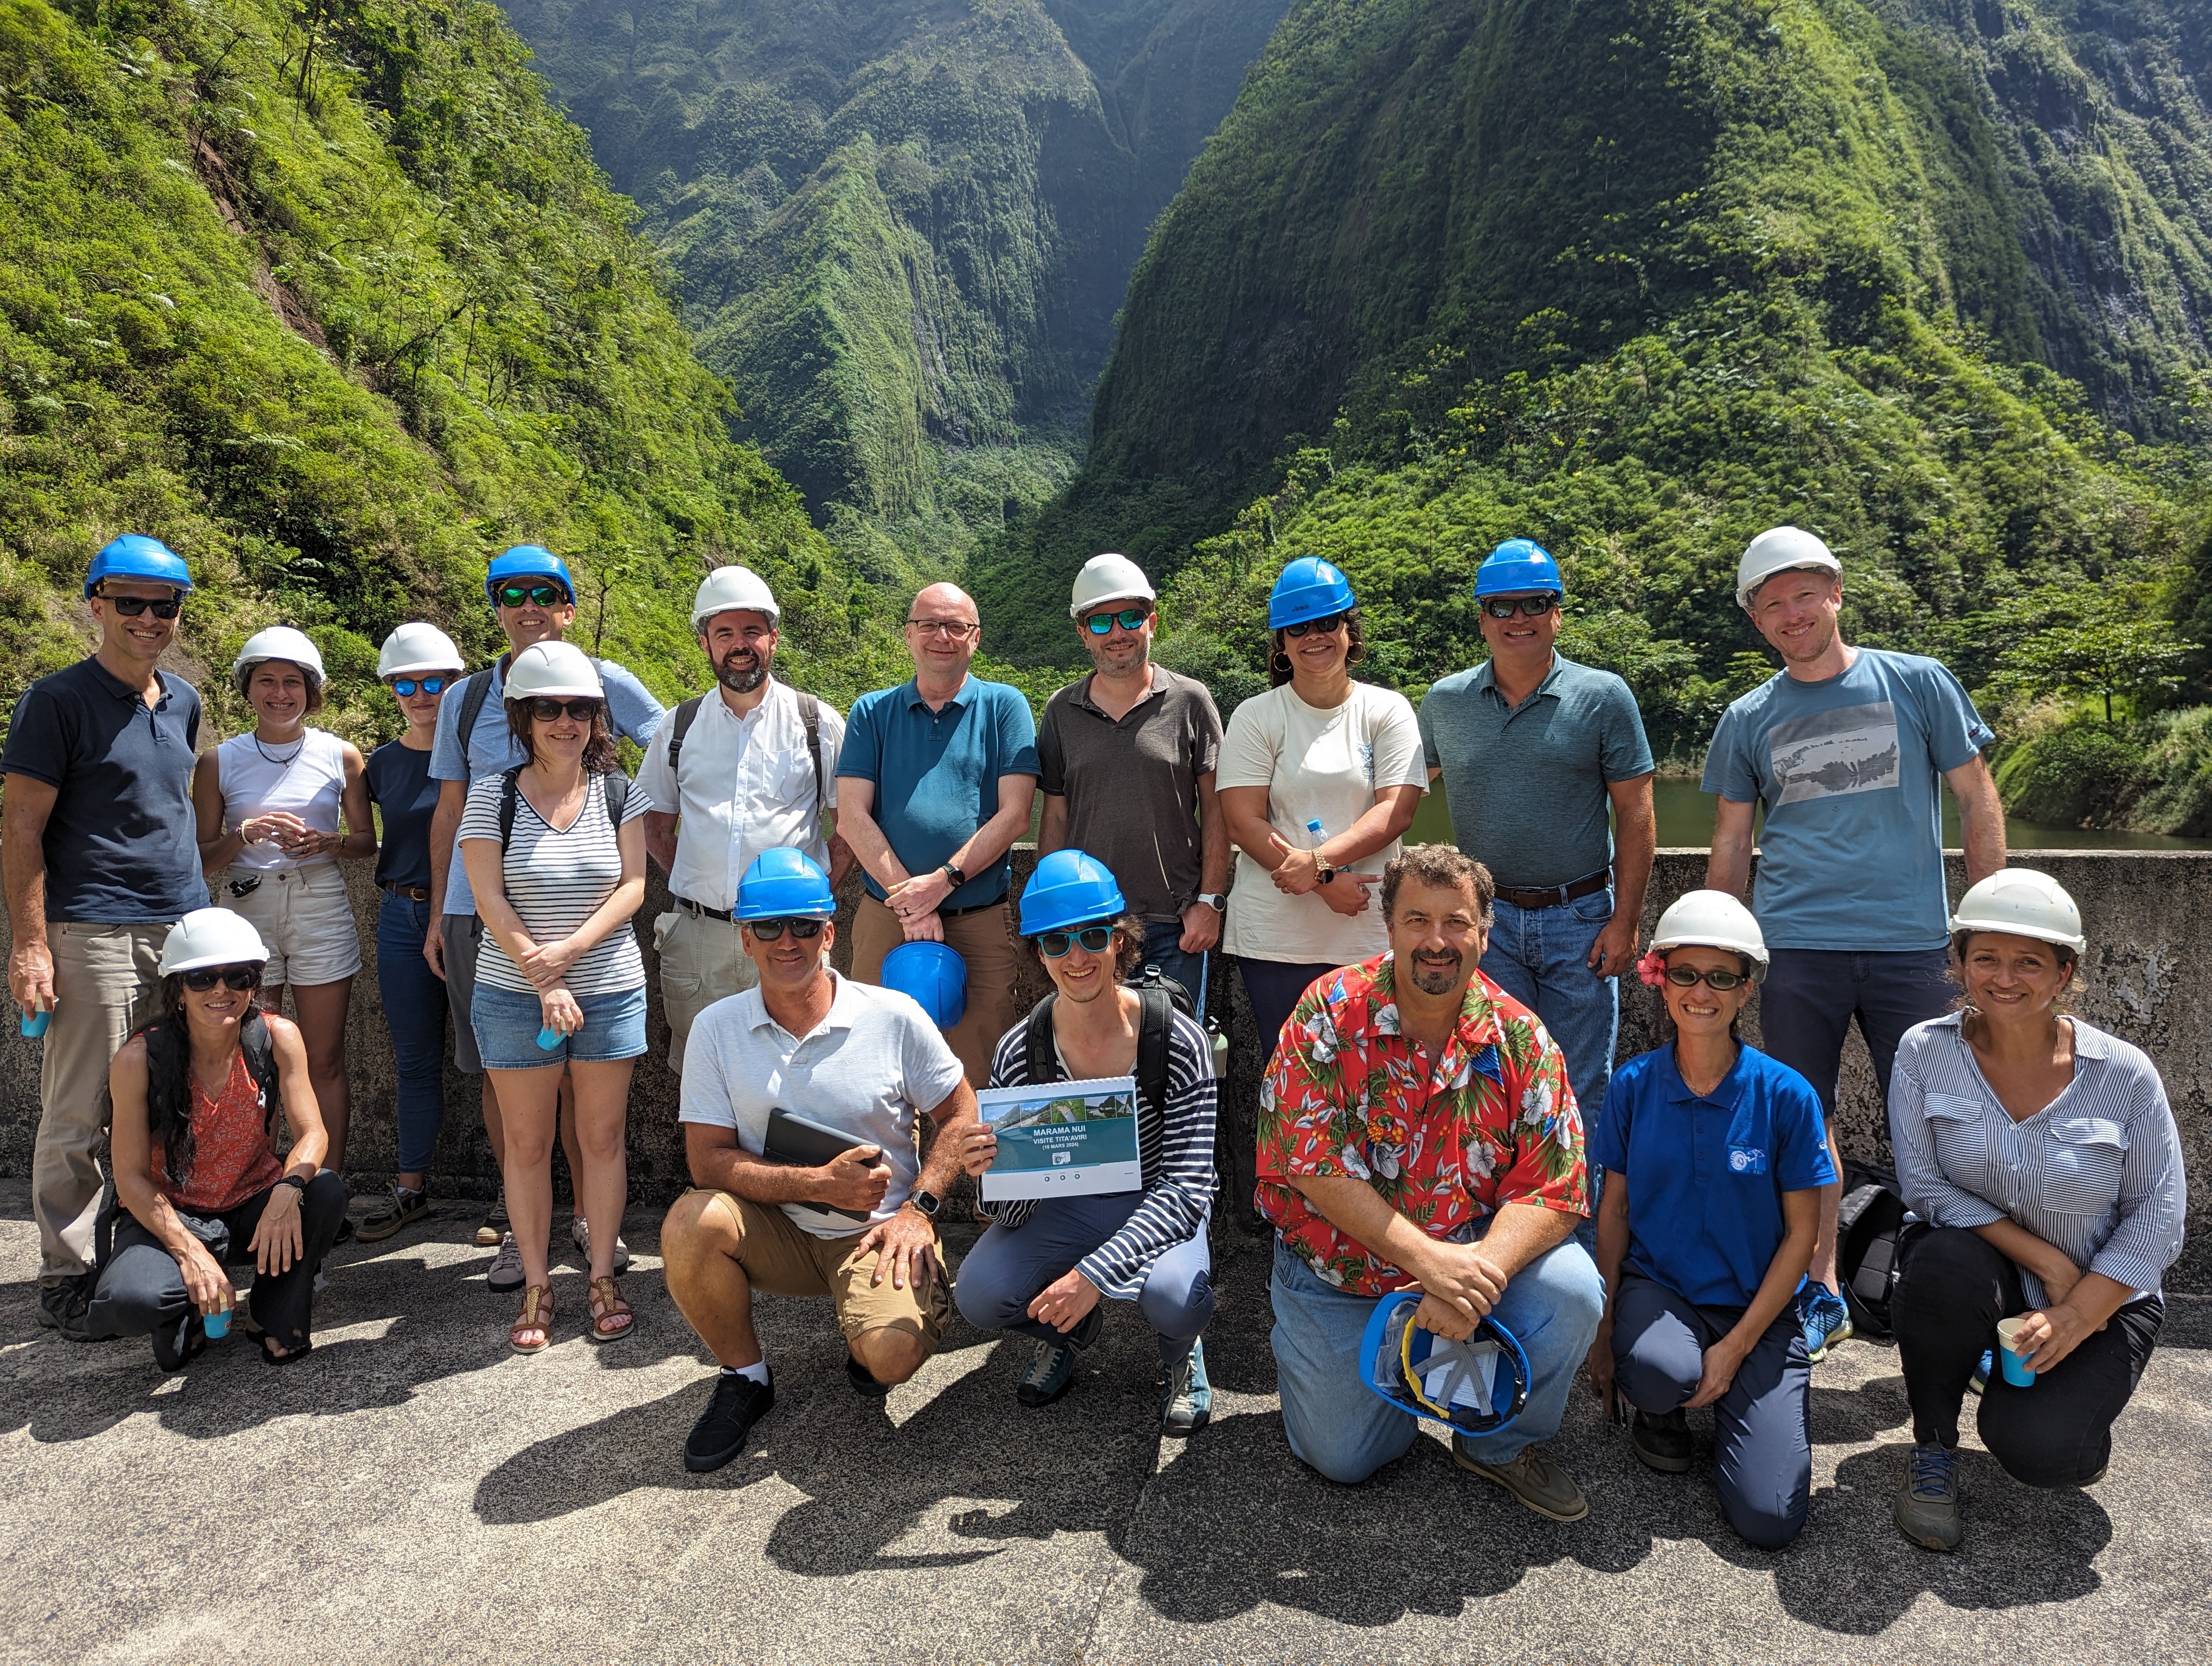 group picture in front of green mountains with people wearing safety helmets